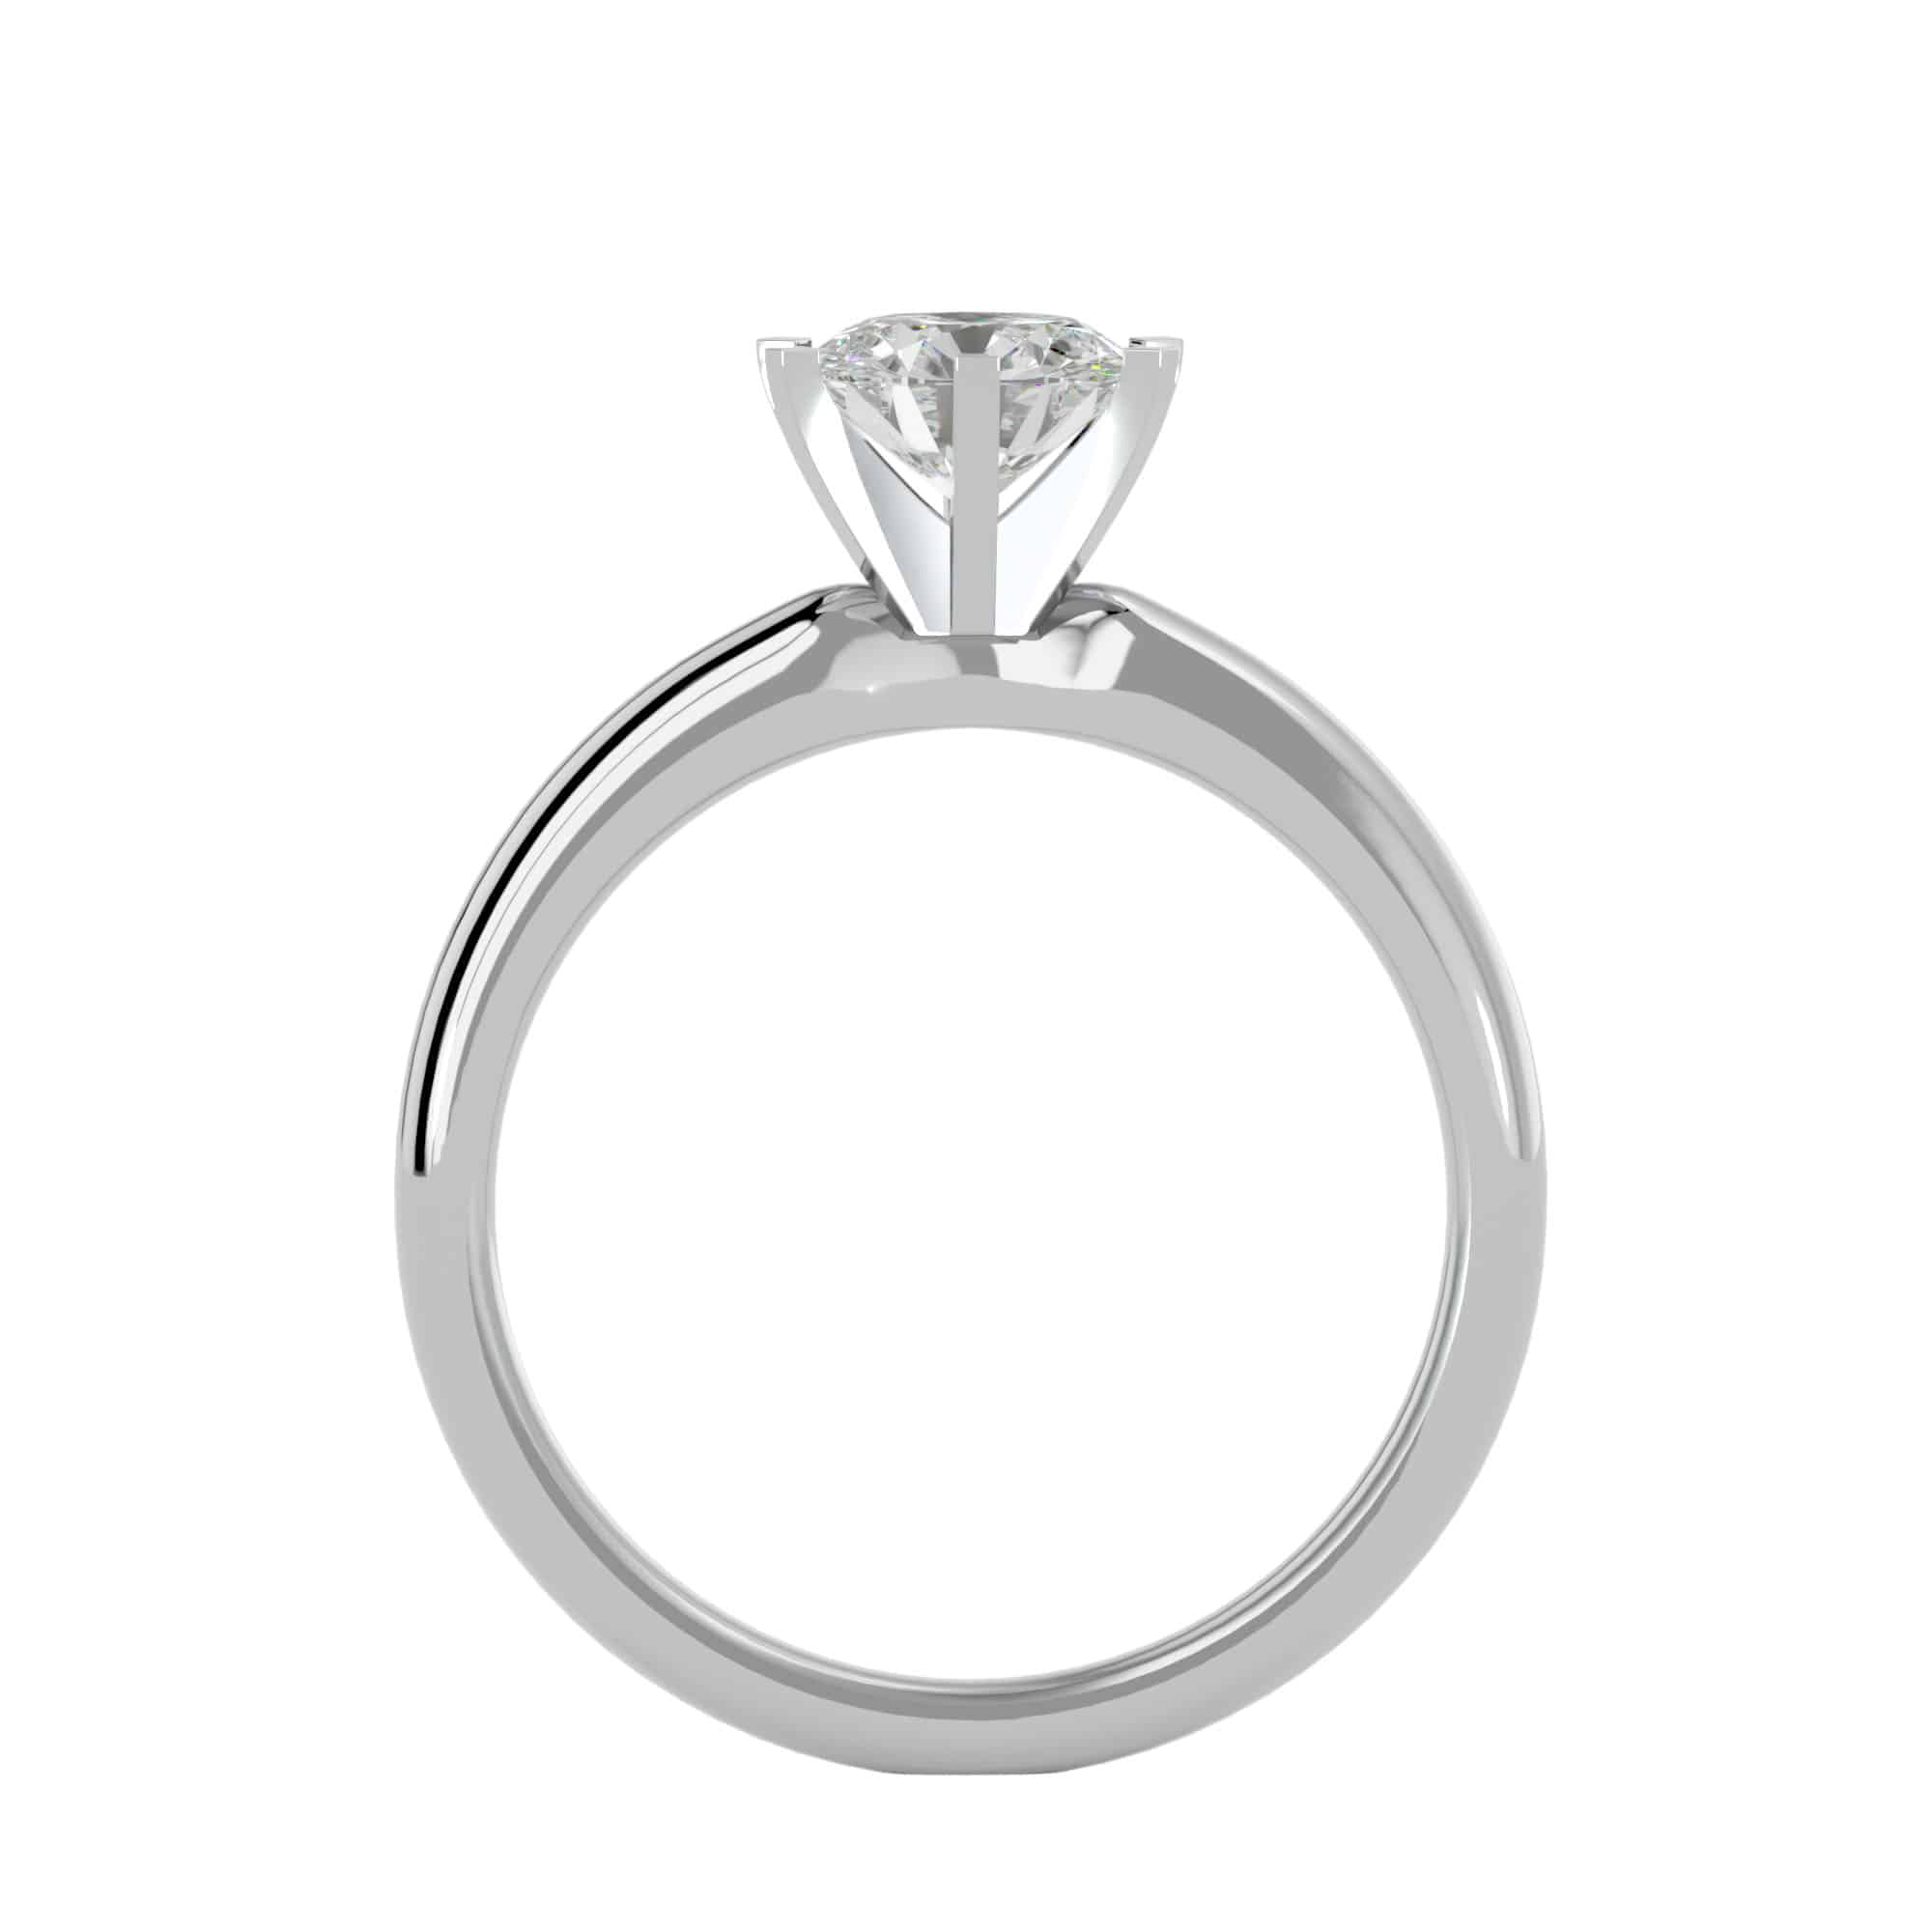 6 Prong Solitaire Engagement Ring High Dome Setting